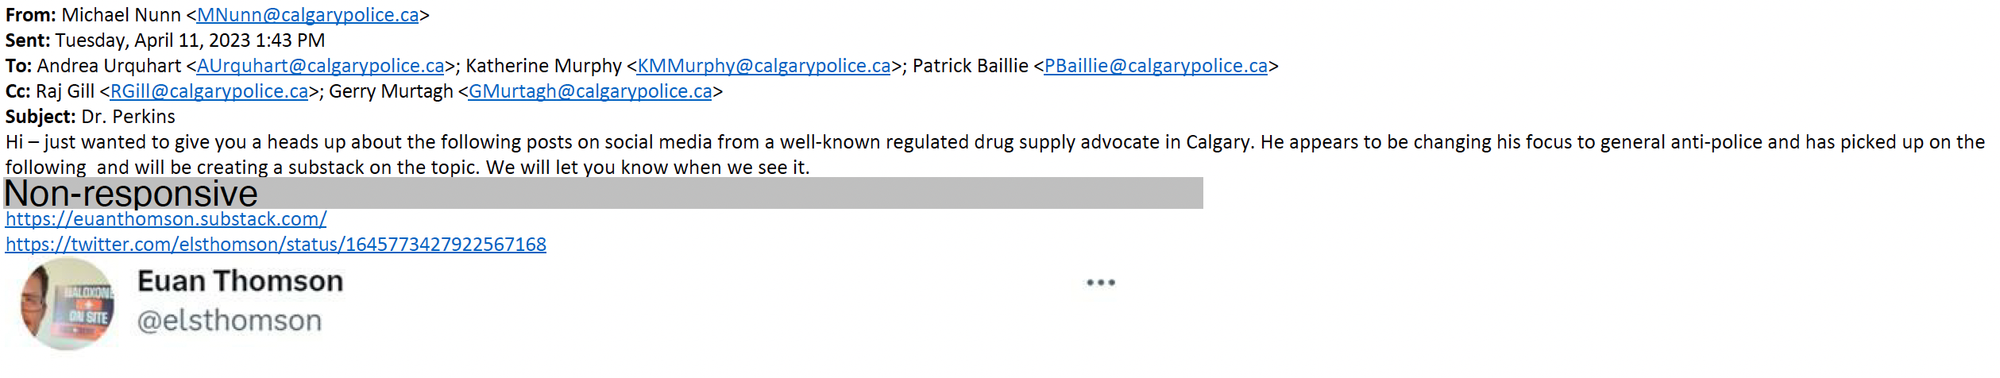 Email reads: Hi - just wanted to give you a heads up about the following posts on social media from a well-known regulated drug supply advocate in Calgary. He appears to be changing his focus to general anti-police and has picked up on the following and will be creating a substack on the topic. We will let you know when we see it.